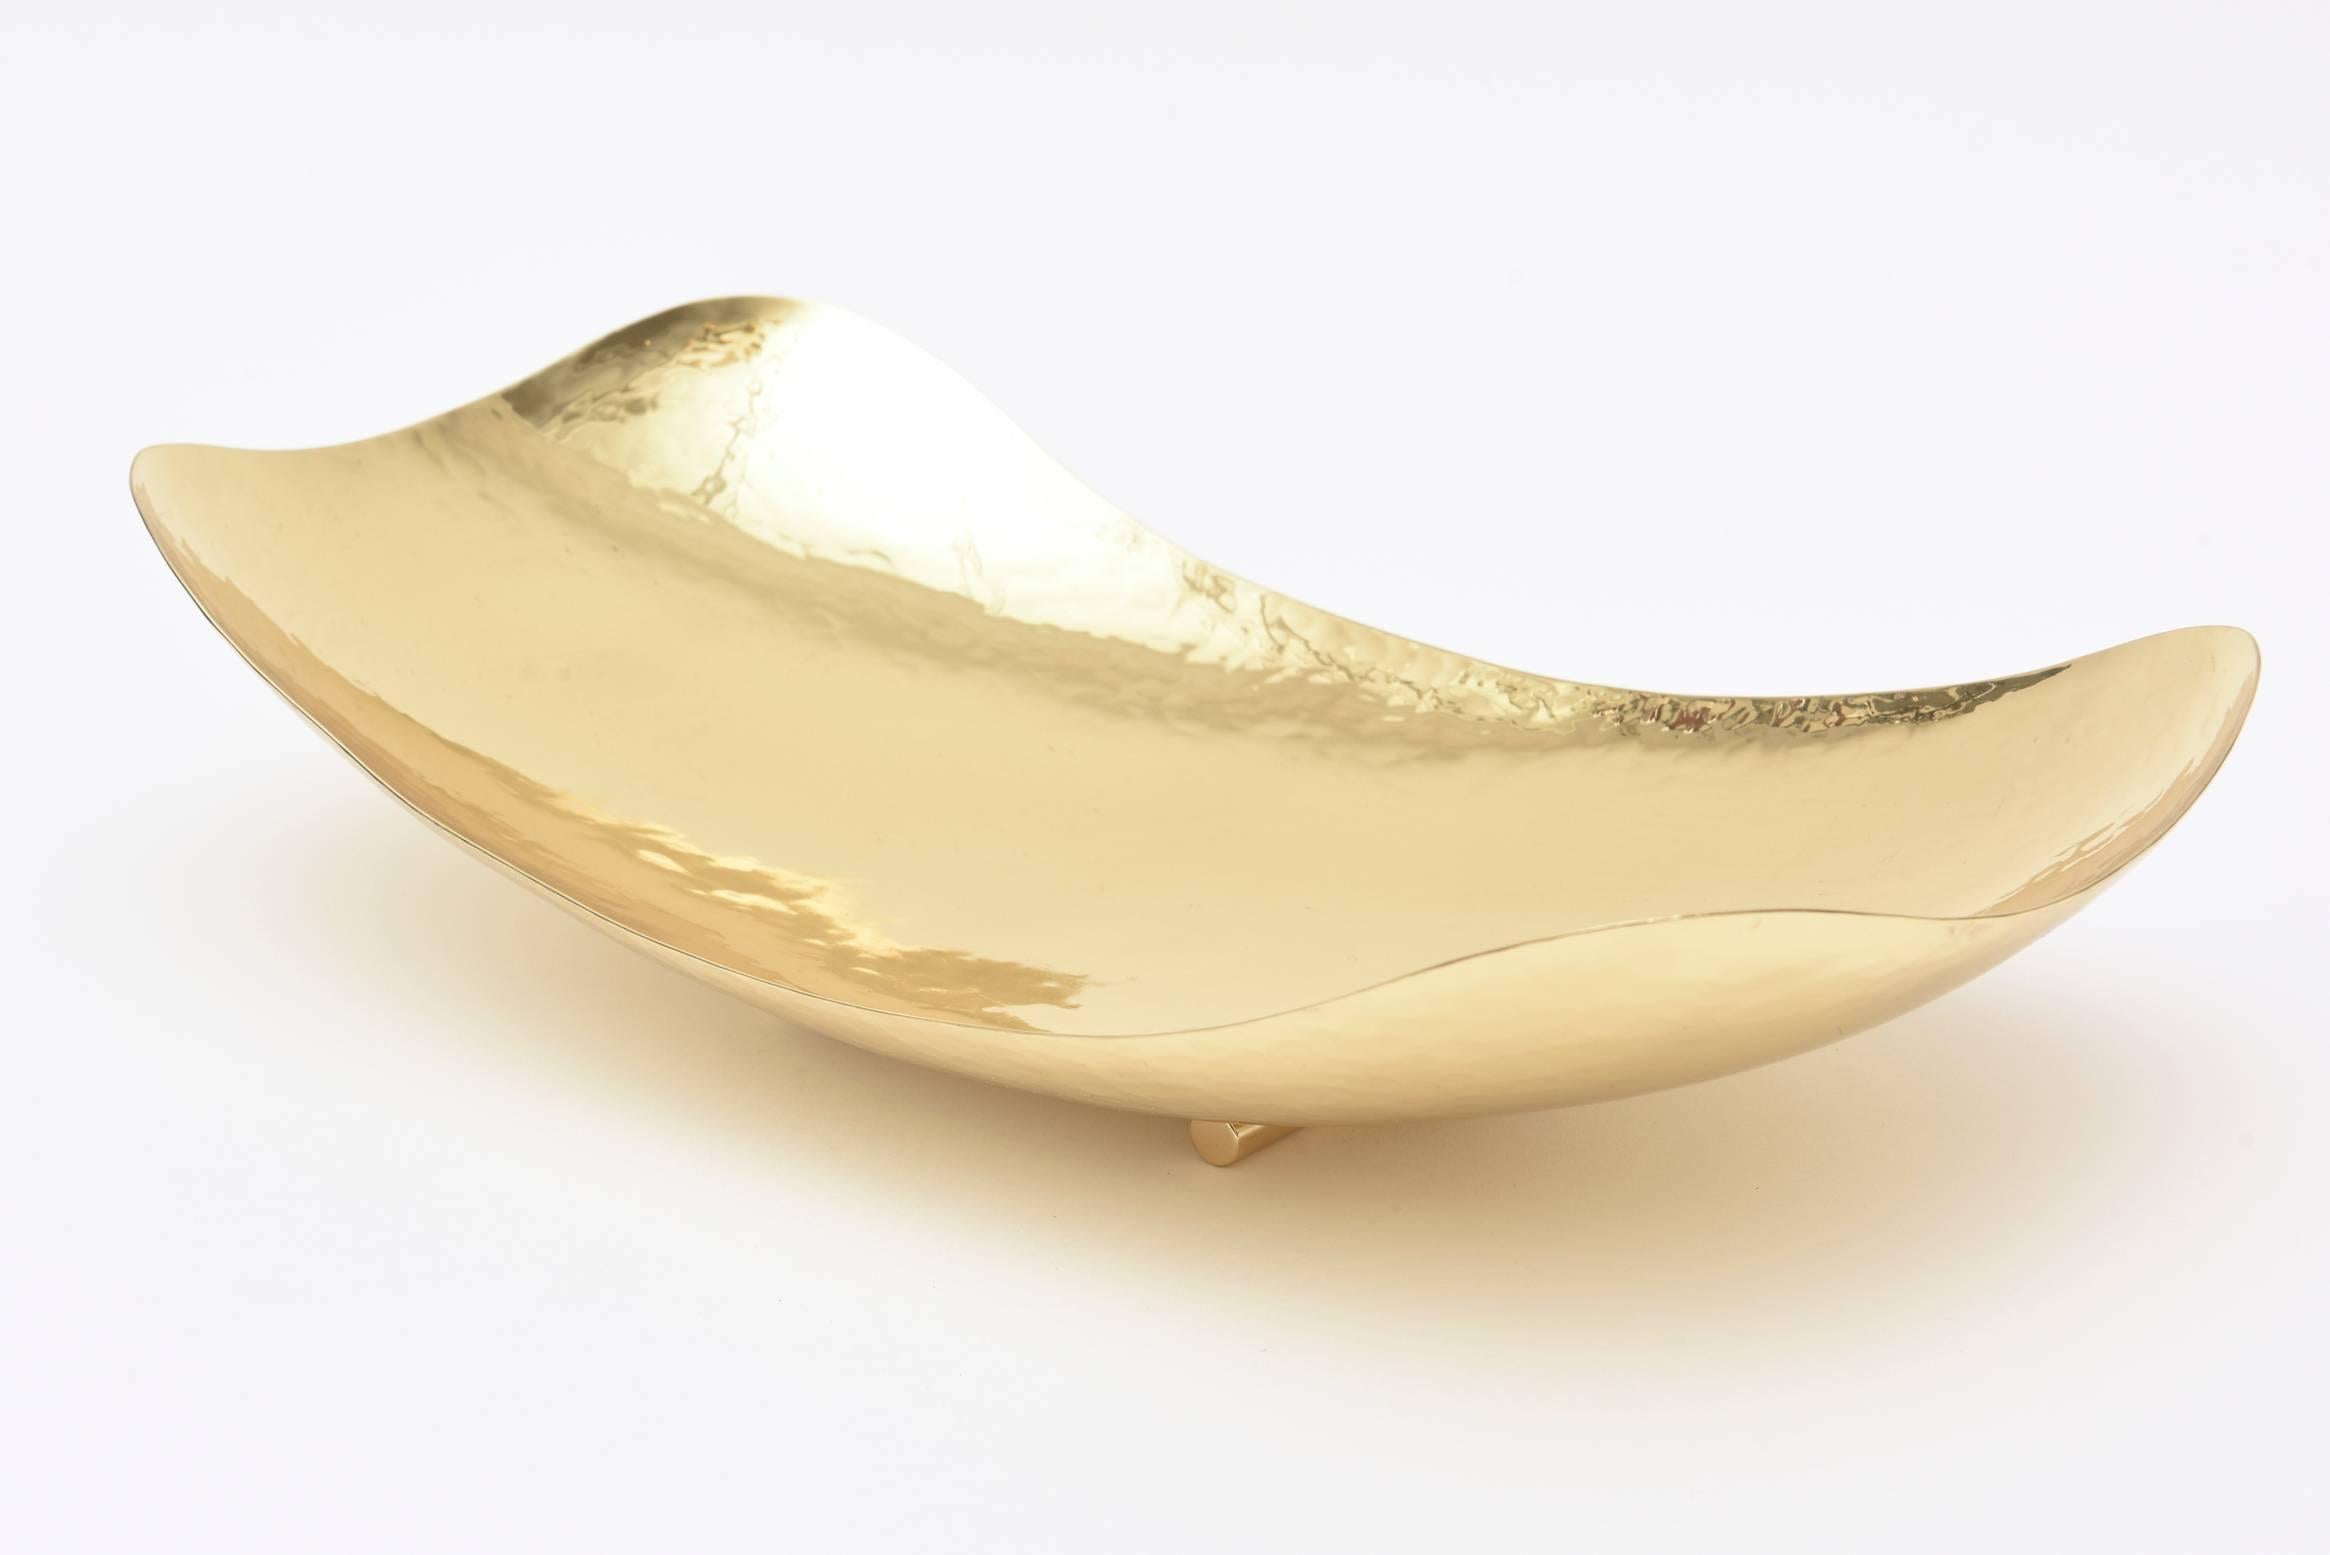 This gorgeous hand-hammered and newly polished brass bowl has been attributed to the work of Carl
Auböck. It is hallmarked Austria on the back. The shape is modern yet the time period is vintage midcentury. The sculptural shape is wonderful. The